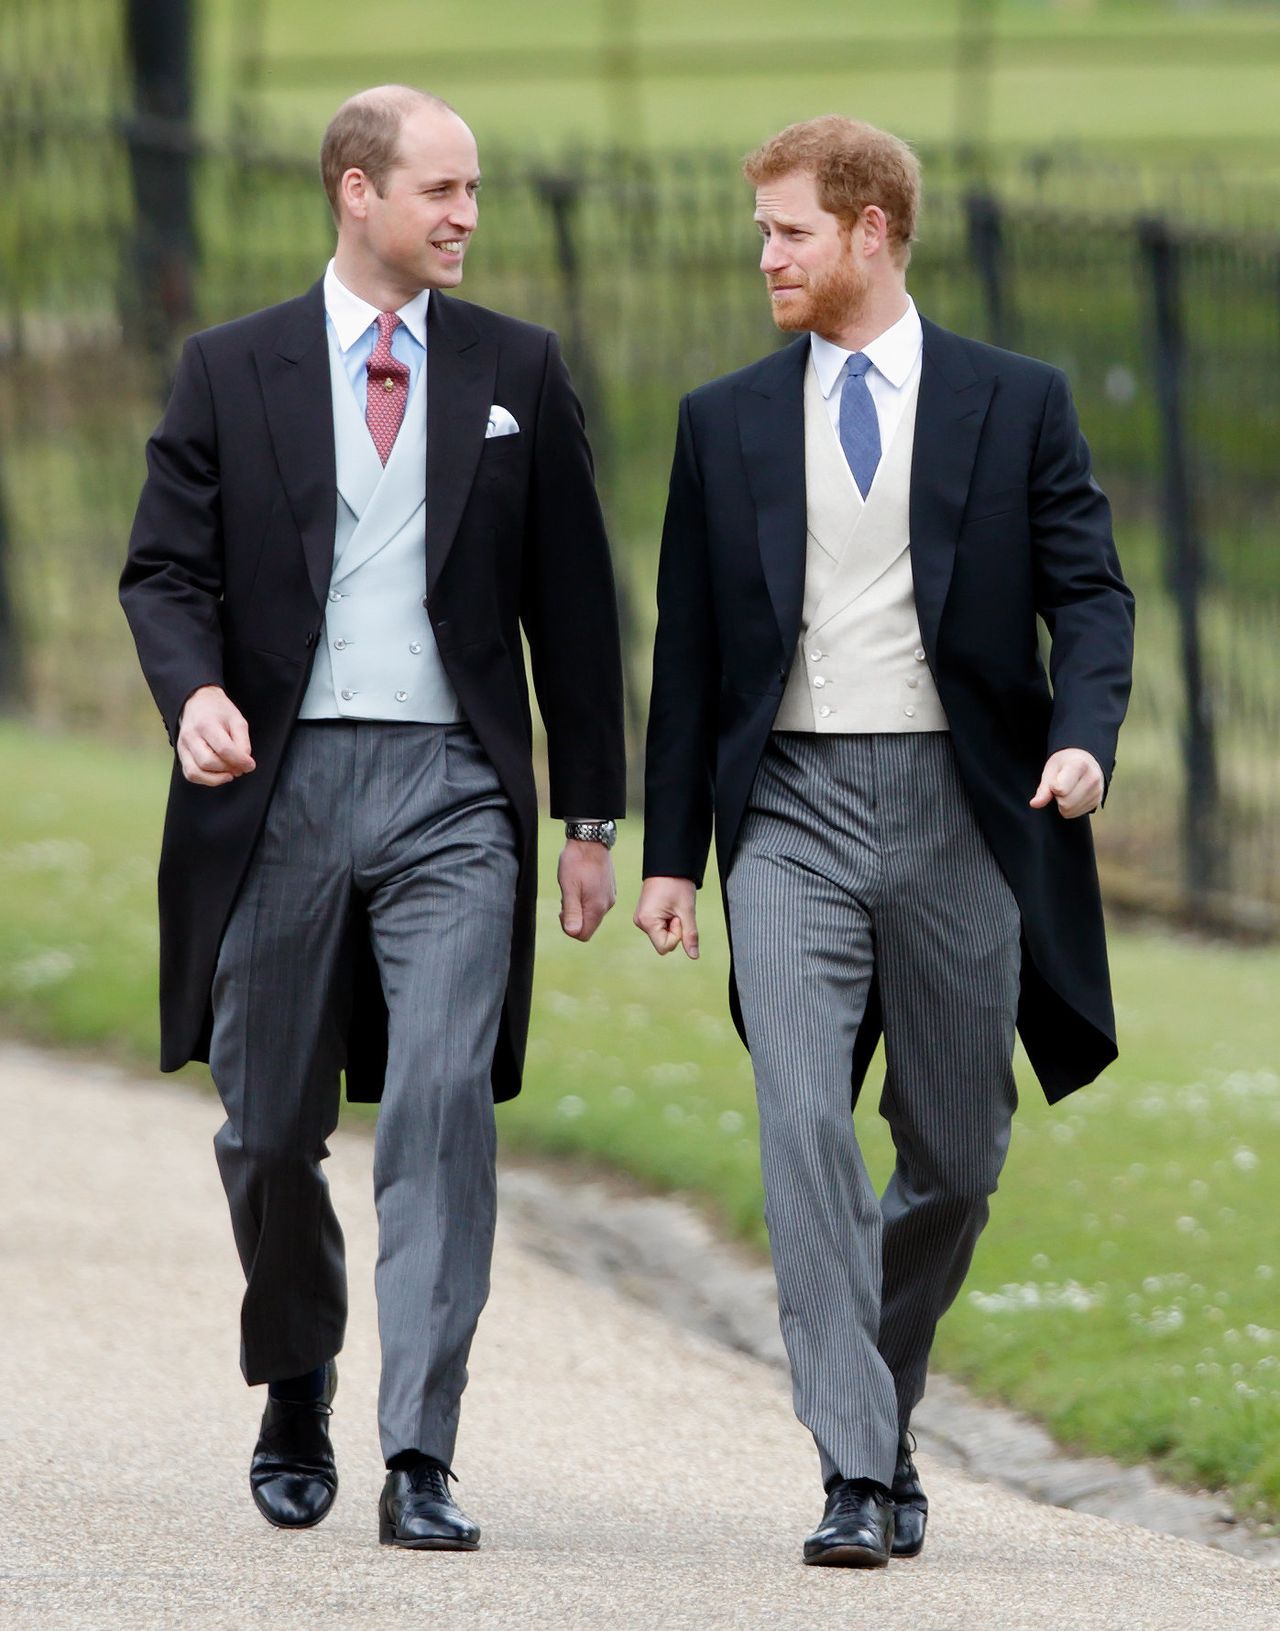 Male guests are expected to wear morning suits to royal weddings, like